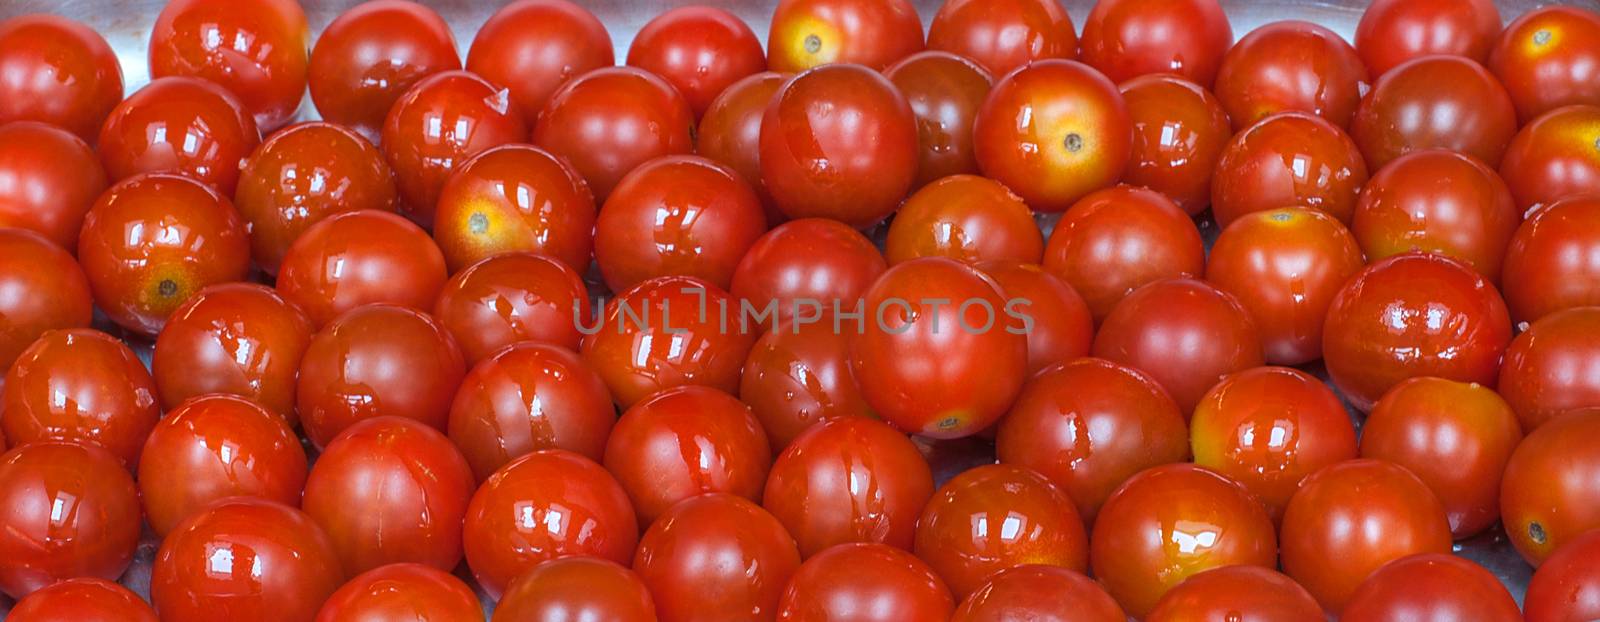 closeup of lots of red cherry tomatoes by sirspread